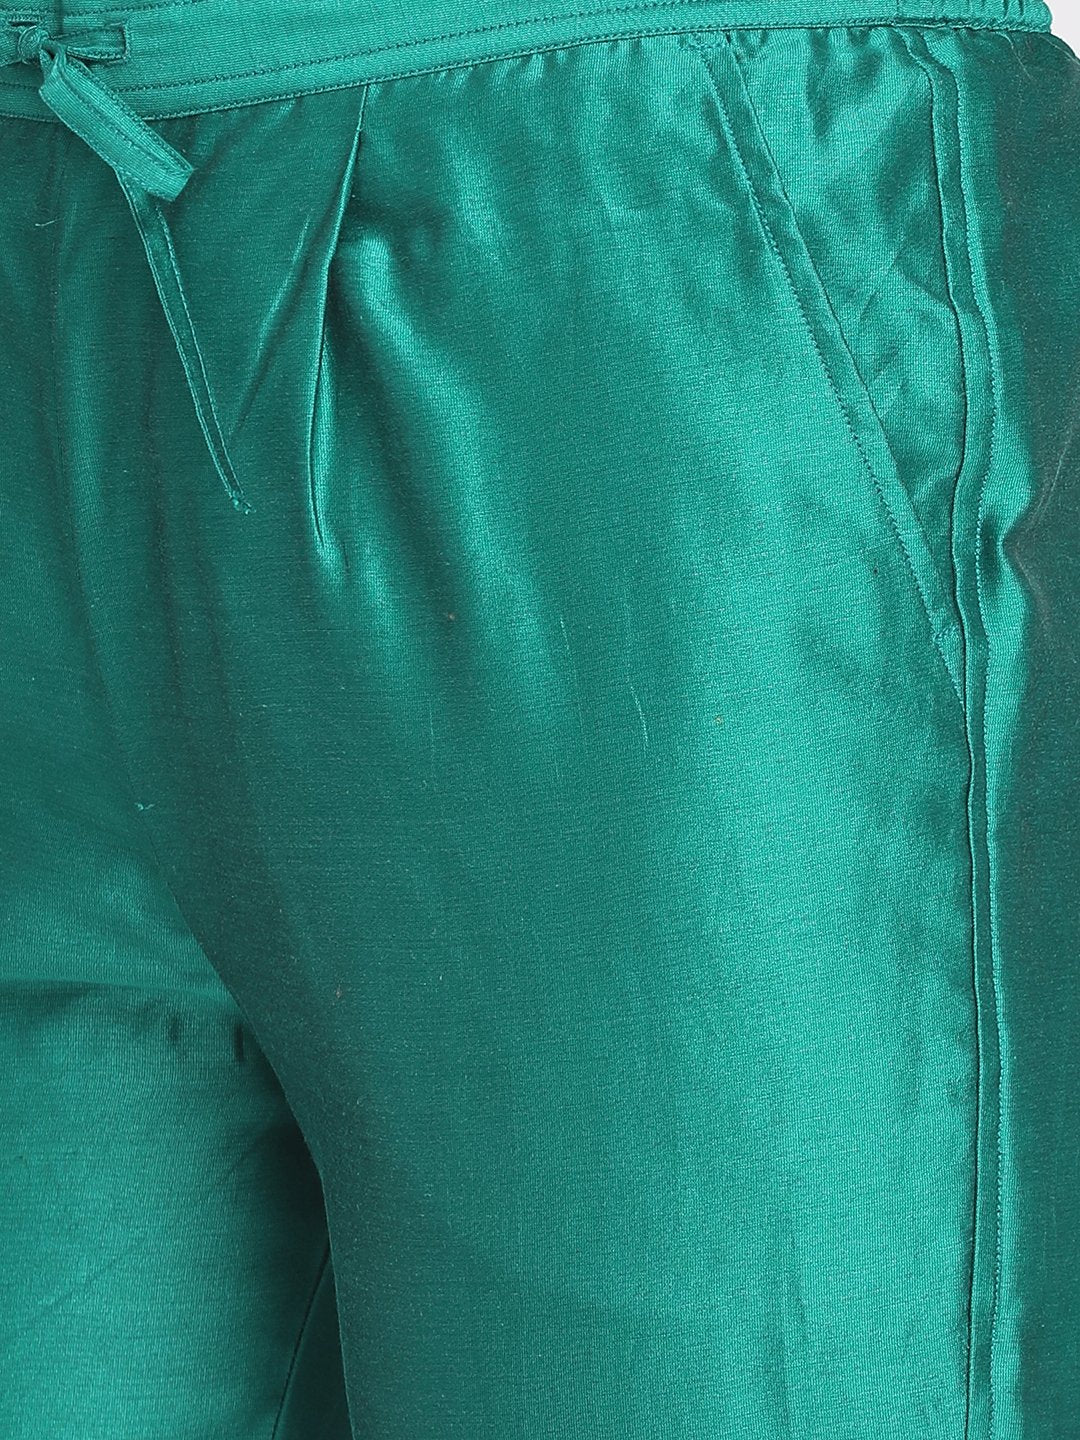 Pure chanderi green solid cropped pant